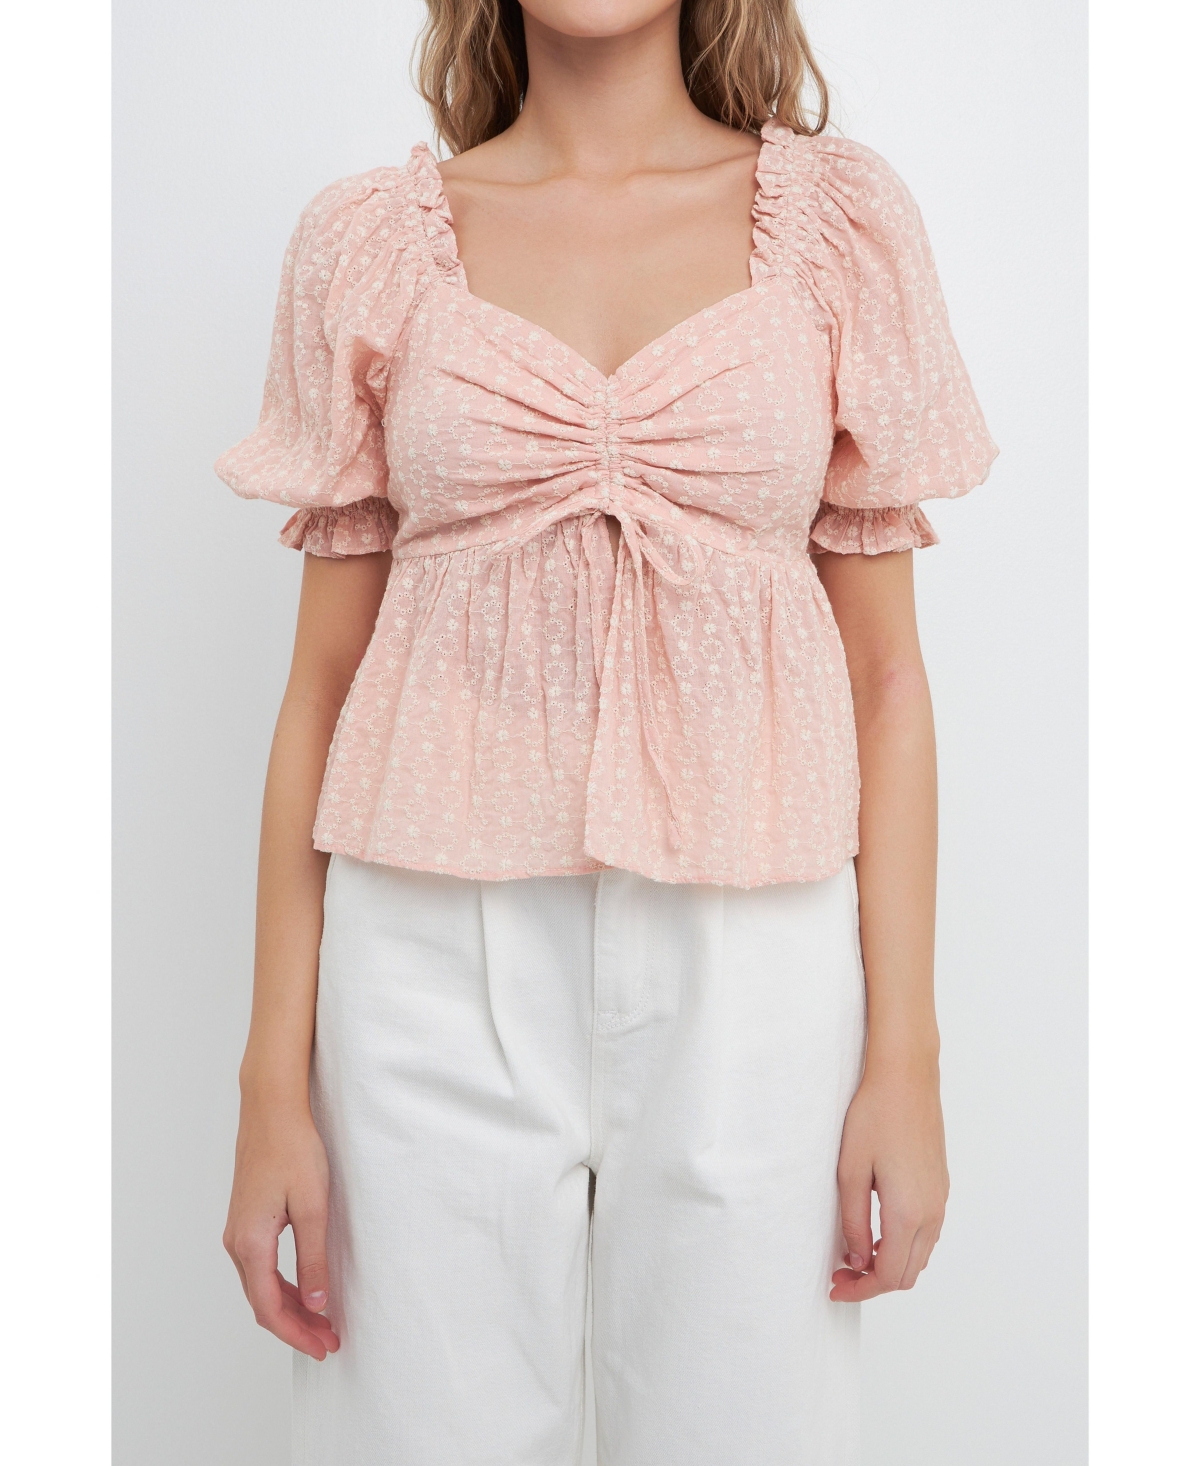 Women's Embroidered SweetHeart Top with Puff Sleeves - Pink